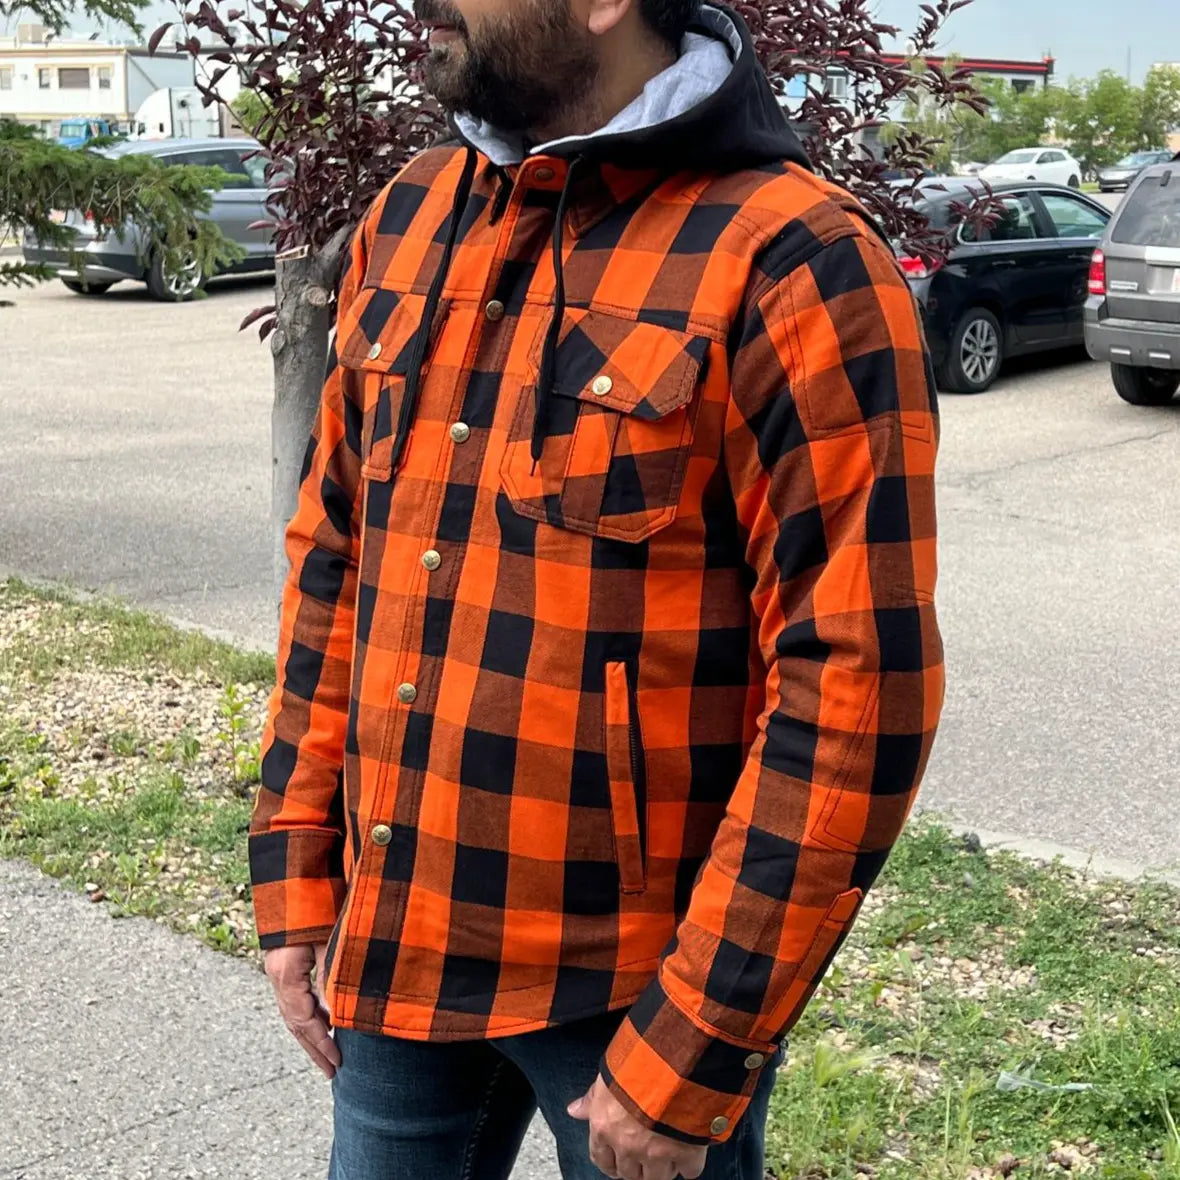 Milwaukee Leather Men's Orange & Black Armored Flannel Biker Shirt w/ Reinforced Fibers Men's Armoured Shirts Boutique of Leathers/Open Road